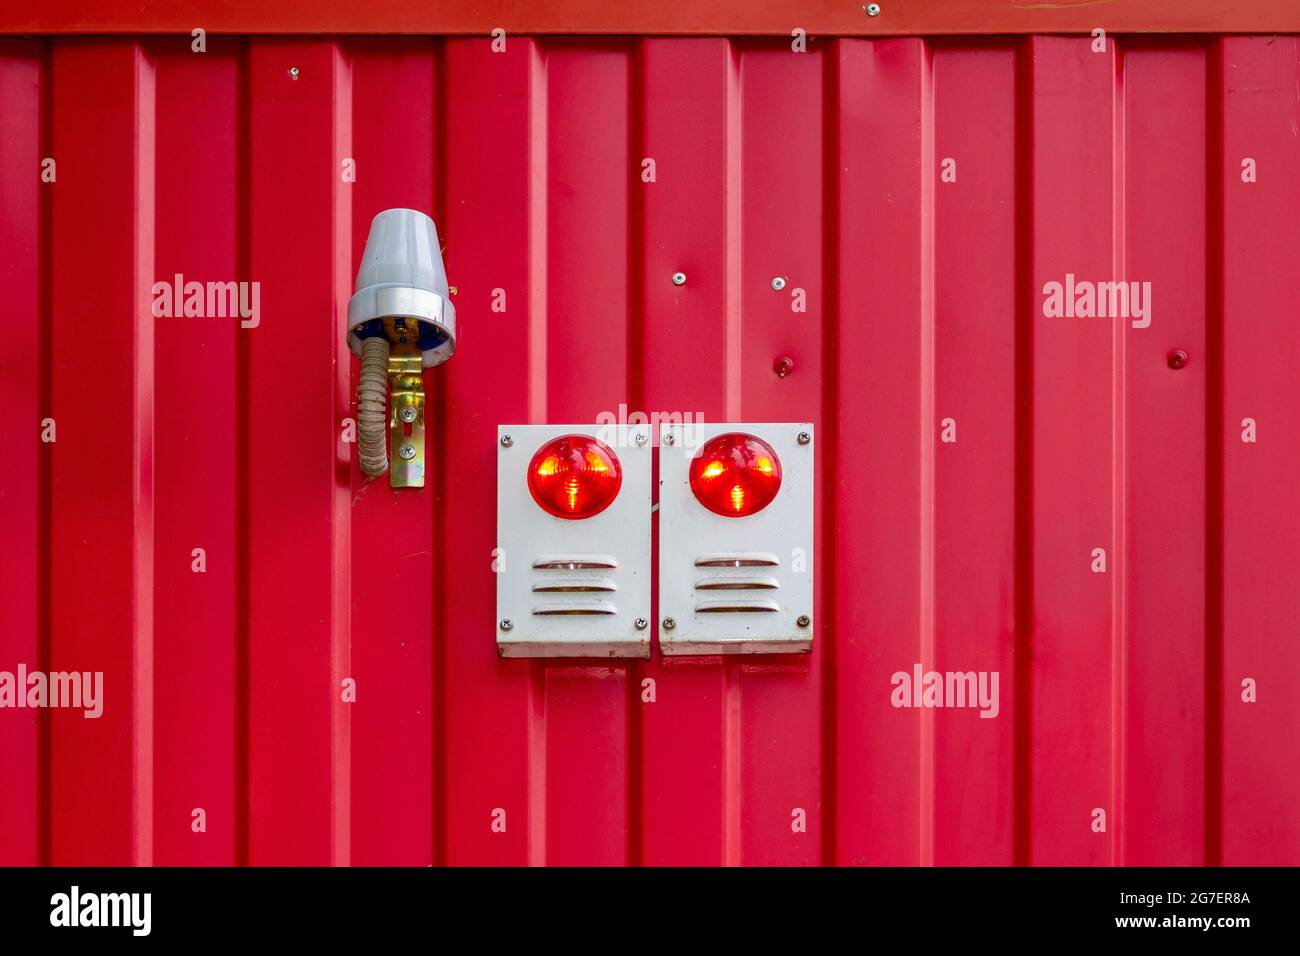 Sound and light alarm system block on the red wall of the building. Stock Photo